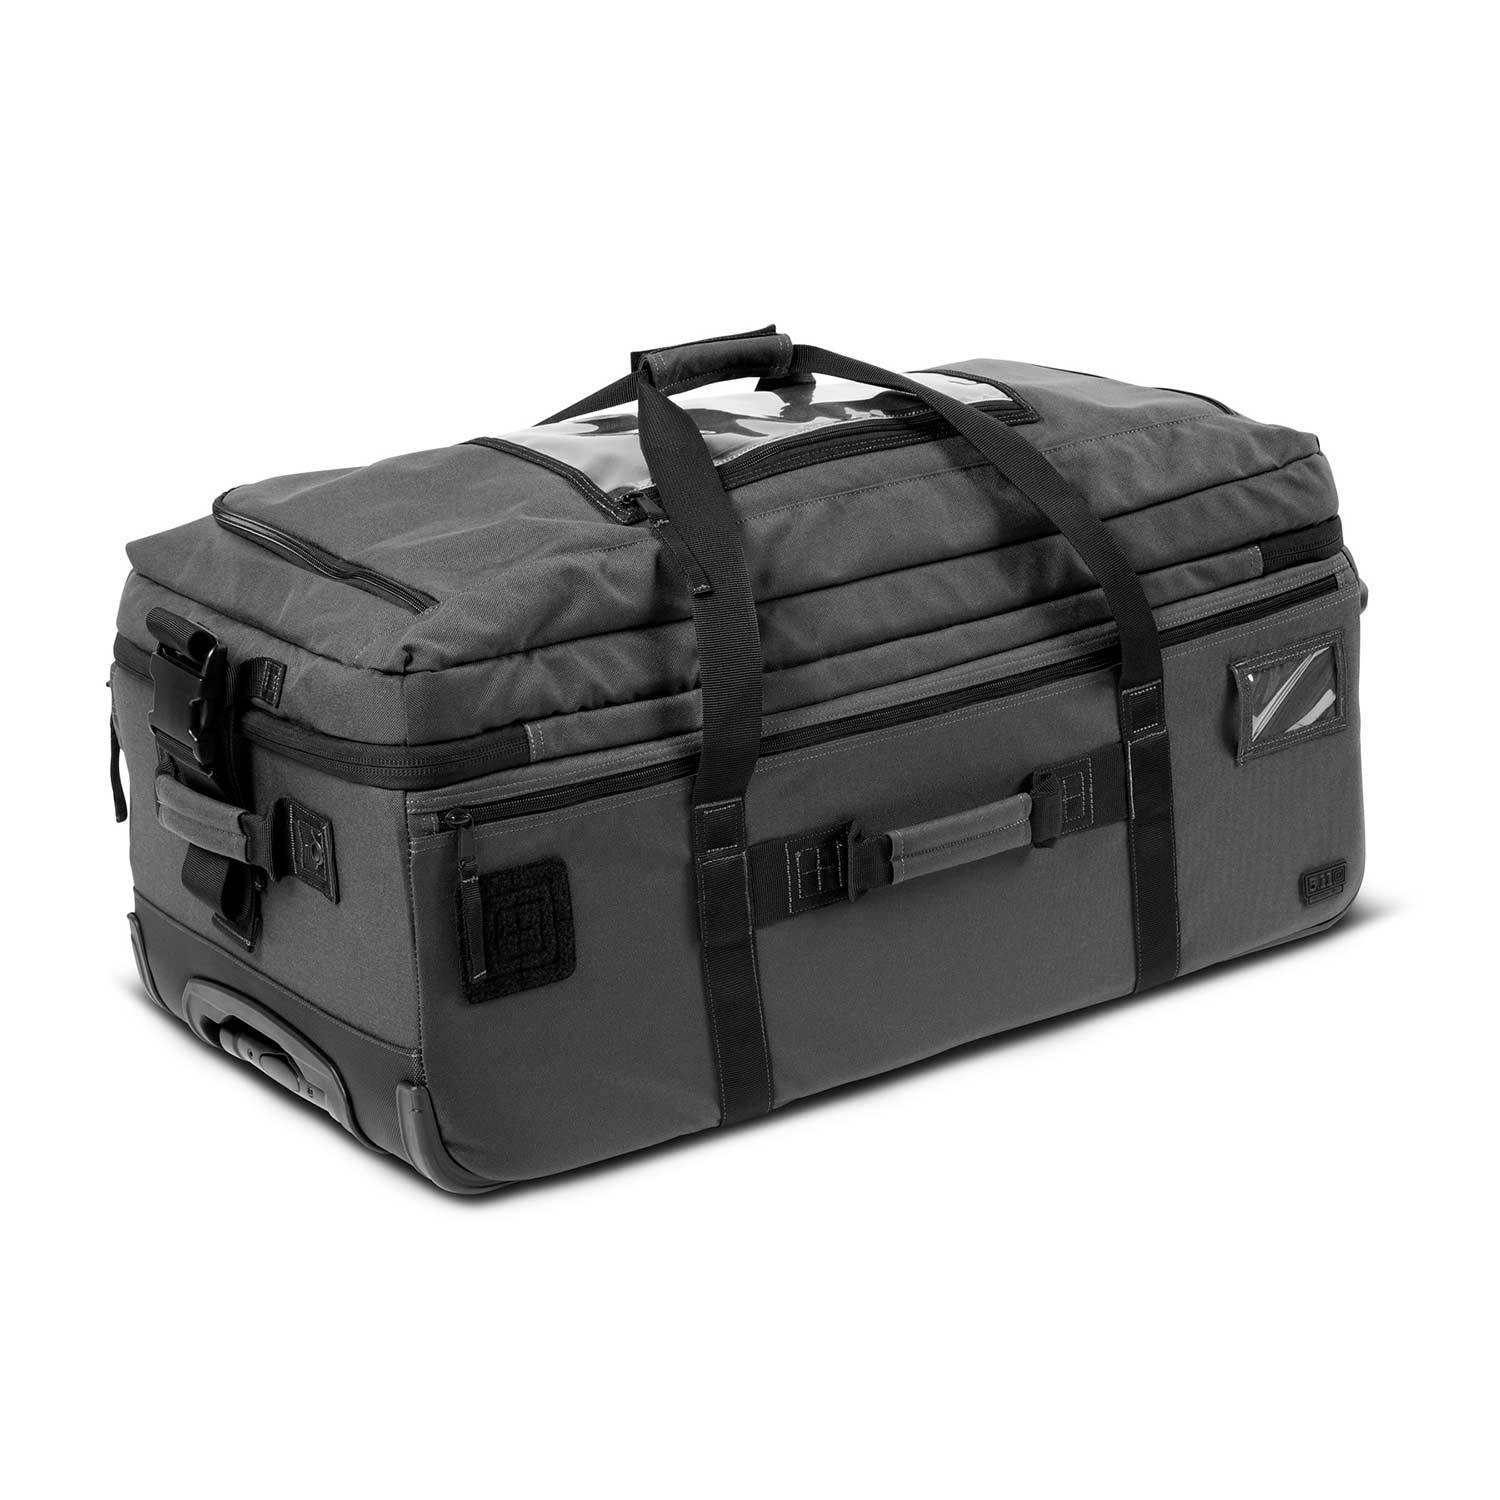 duffle bag with wheels kmart